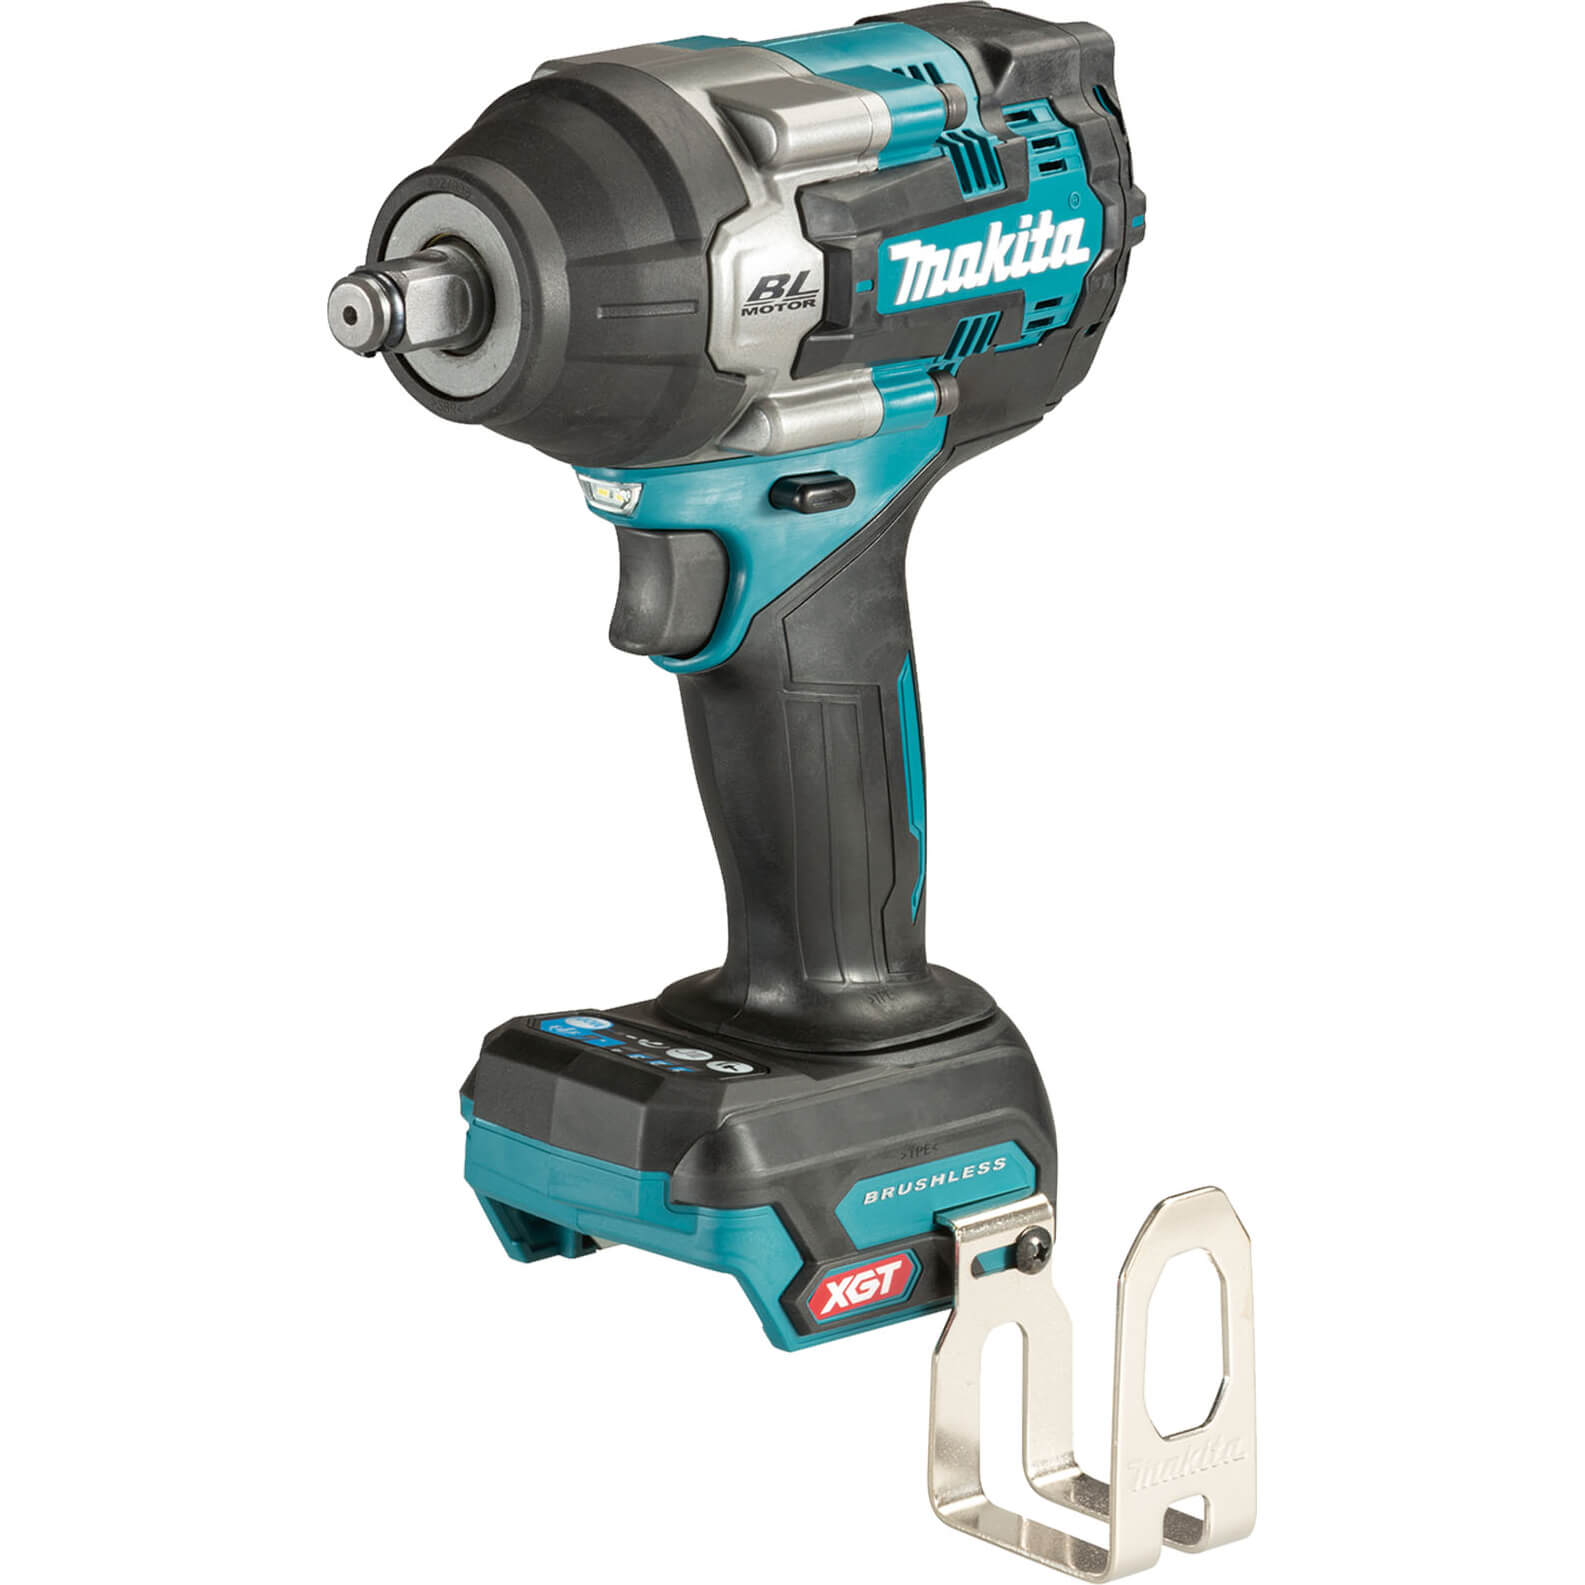 Image of Makita TW007G 40v Max XGT Cordless Brushless 1/2" Drive Impact Wrench No Batteries No Charger No Case